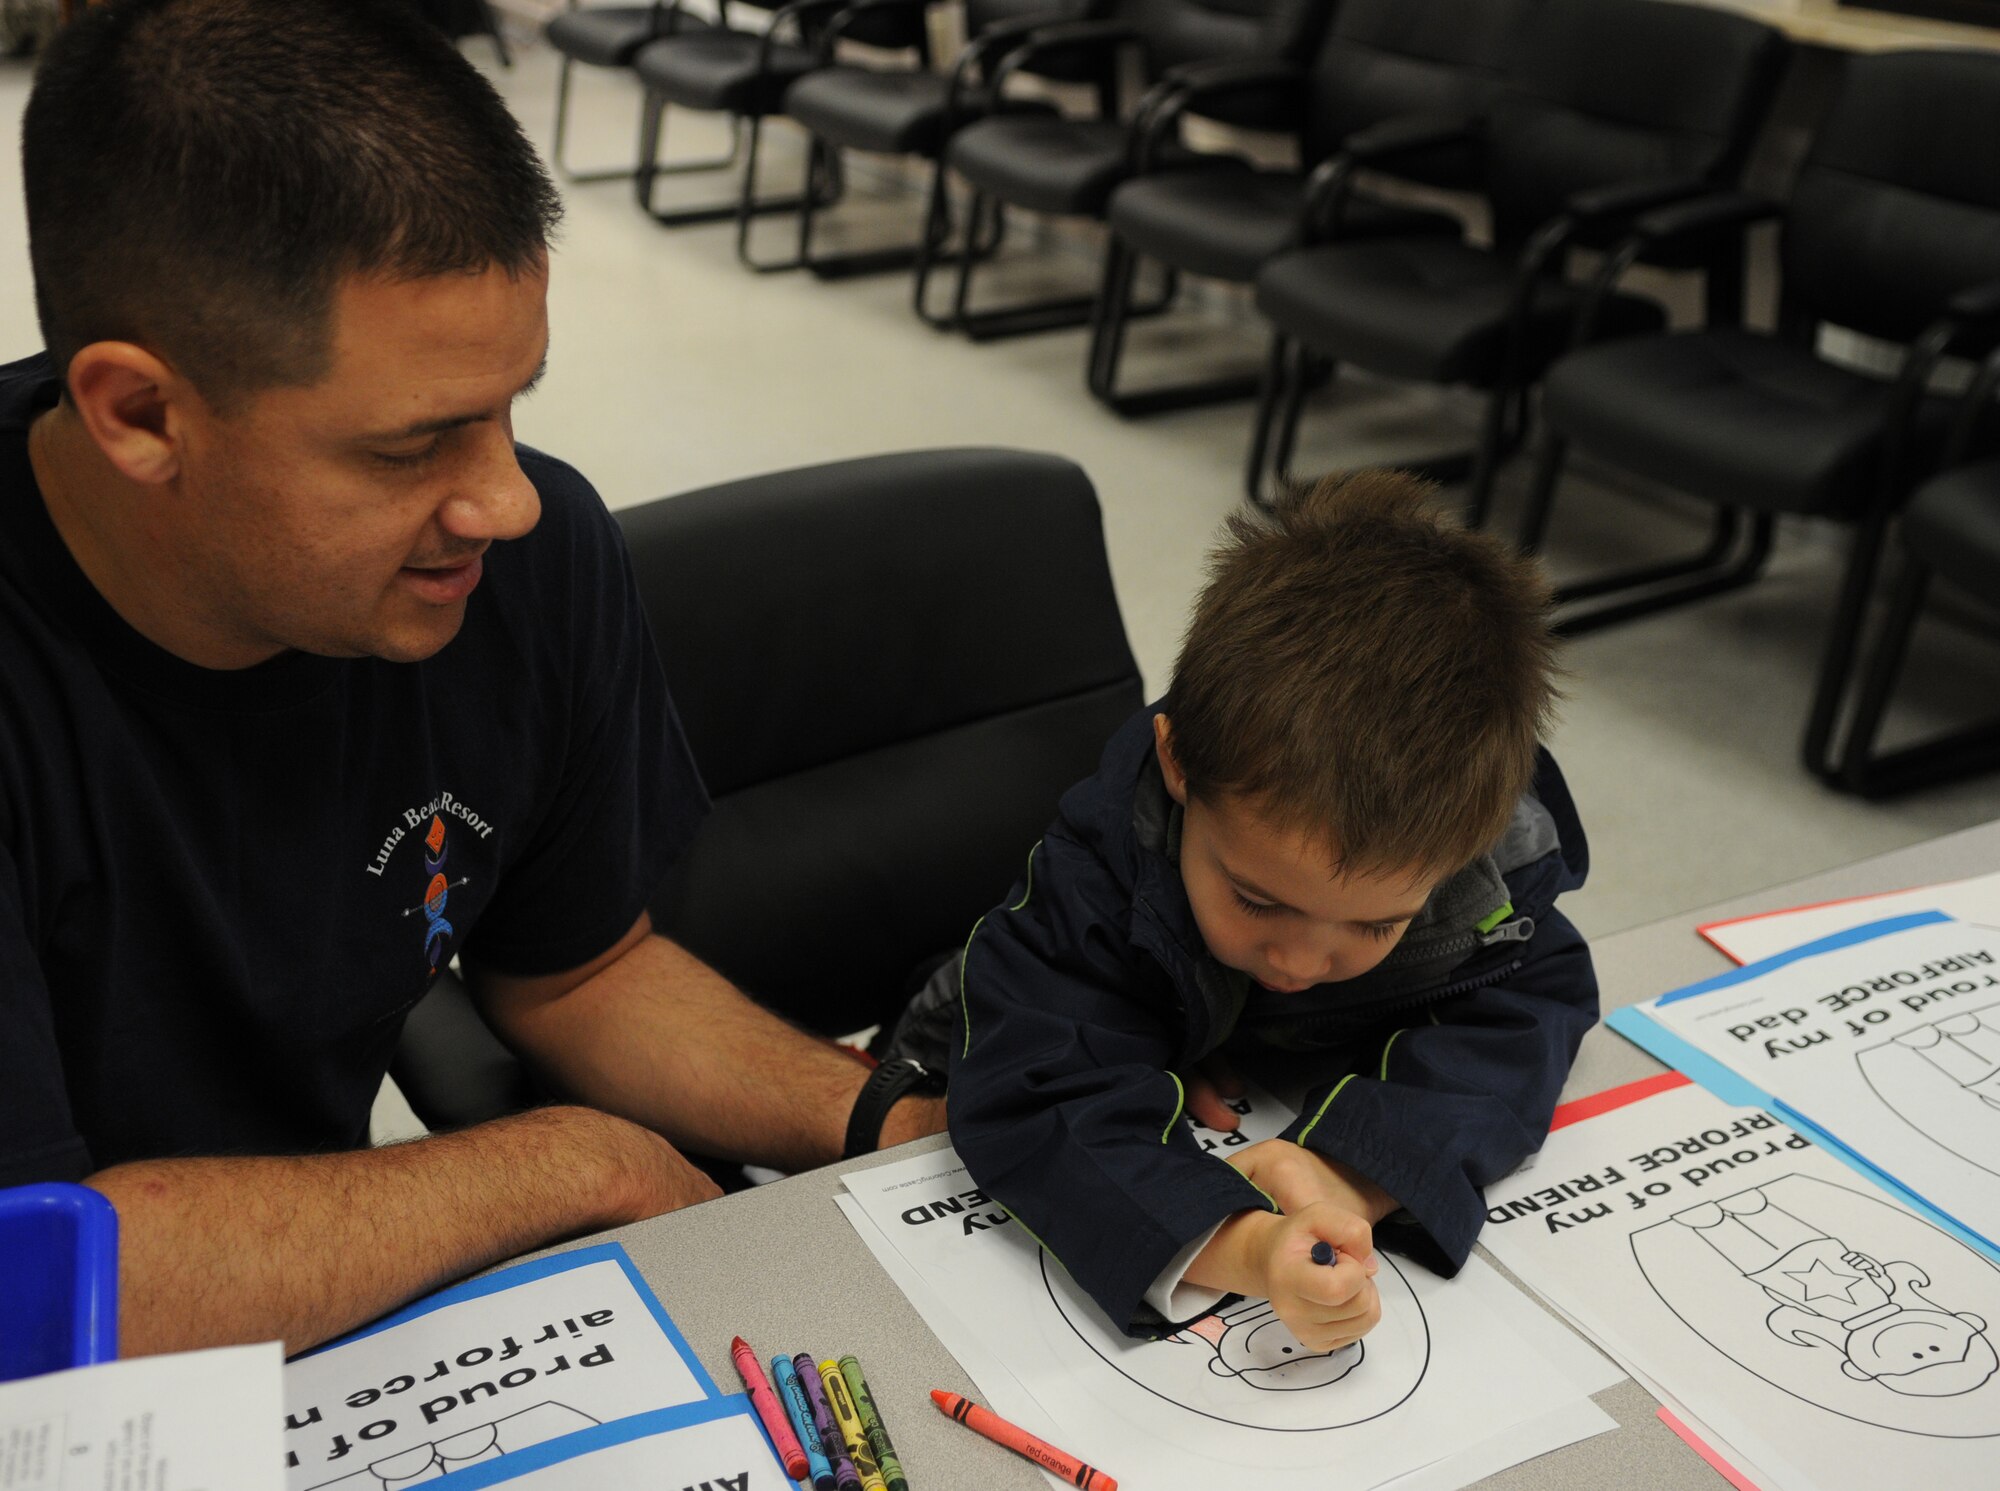 U.S. Air Force 1st Lt. Paul Padilla, 86th Air Evacuation Squadron flight nurse, along with his son August, color pictures in the arts section at the Airman and Family Readiness Center open house for Air Force Family Week, Ramstein Air Base, Germany, Nov. 4, 2009. Nov 1st thru the 7th is designated by Secretary of the Air Force as "Air Force Family Week". (U.S. Air Force photo by Airman 1st Class Caleb Pierce)